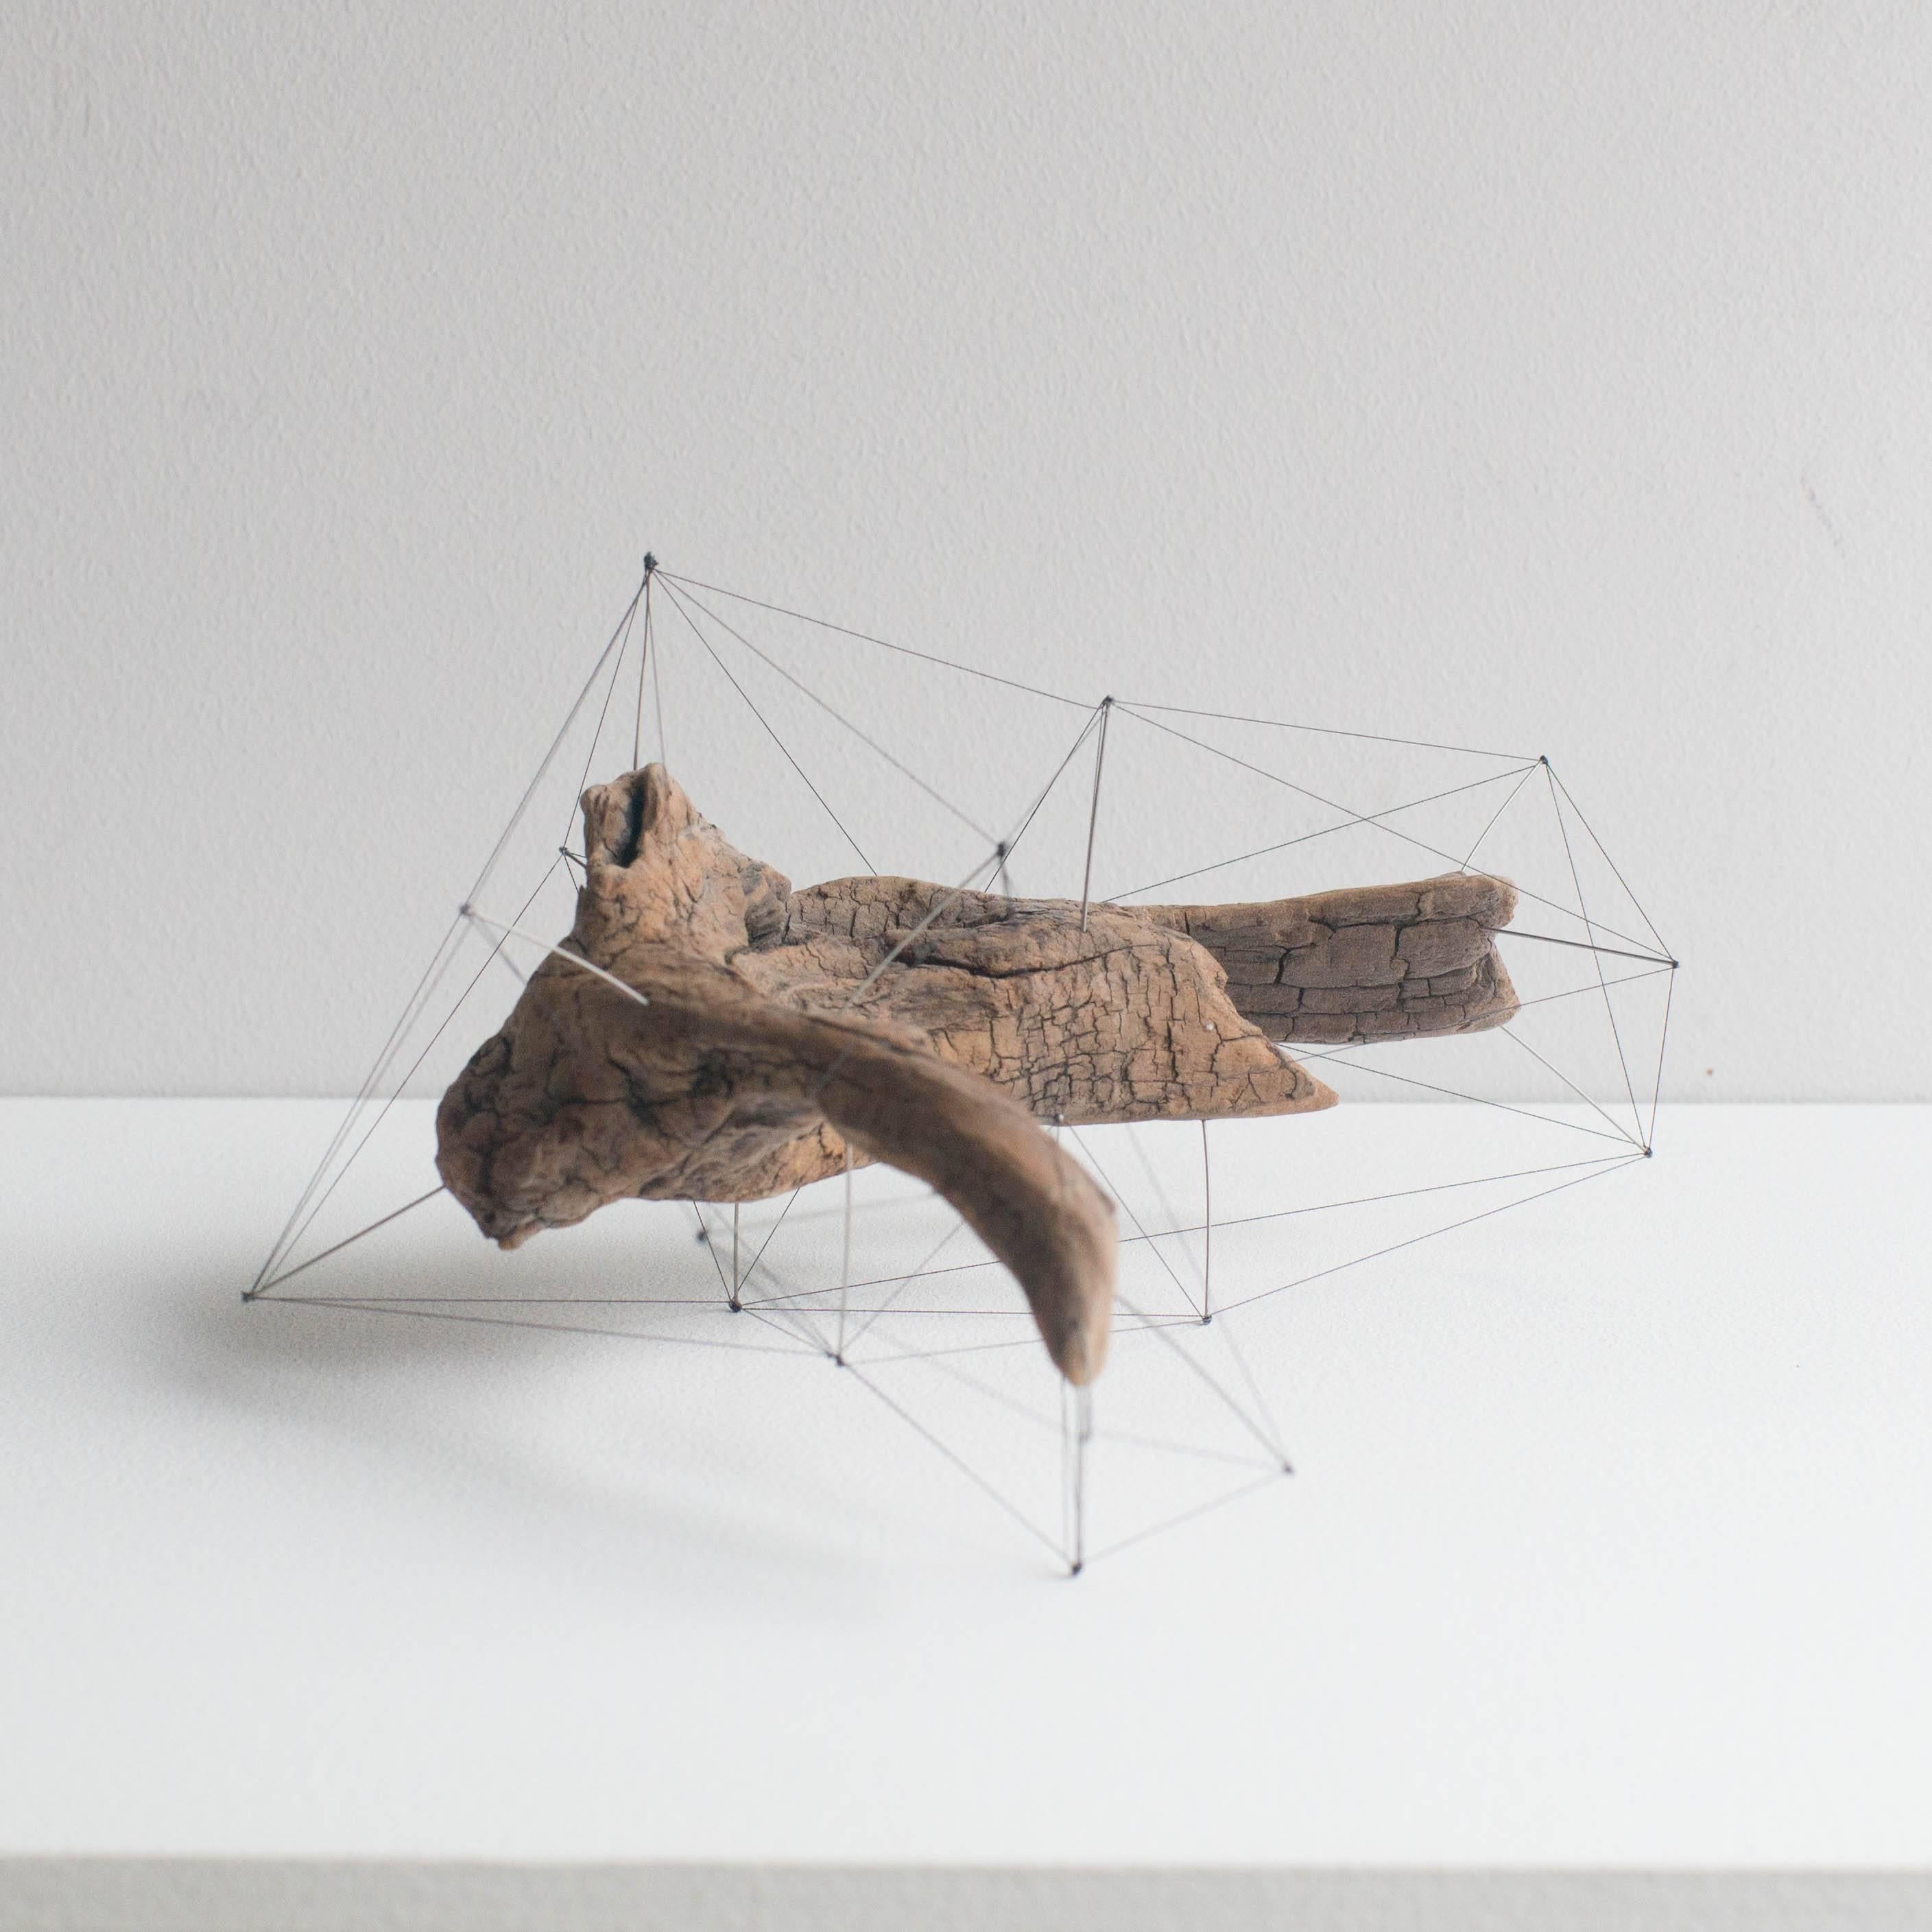 Handmade object made of drift wood, pins and threads. Pins stuck in drift wood, where their tips are tied with threads. It looks like an another crust outside the drift wood, or the three dimensional specimen.

Artist statement:
Driftwood has